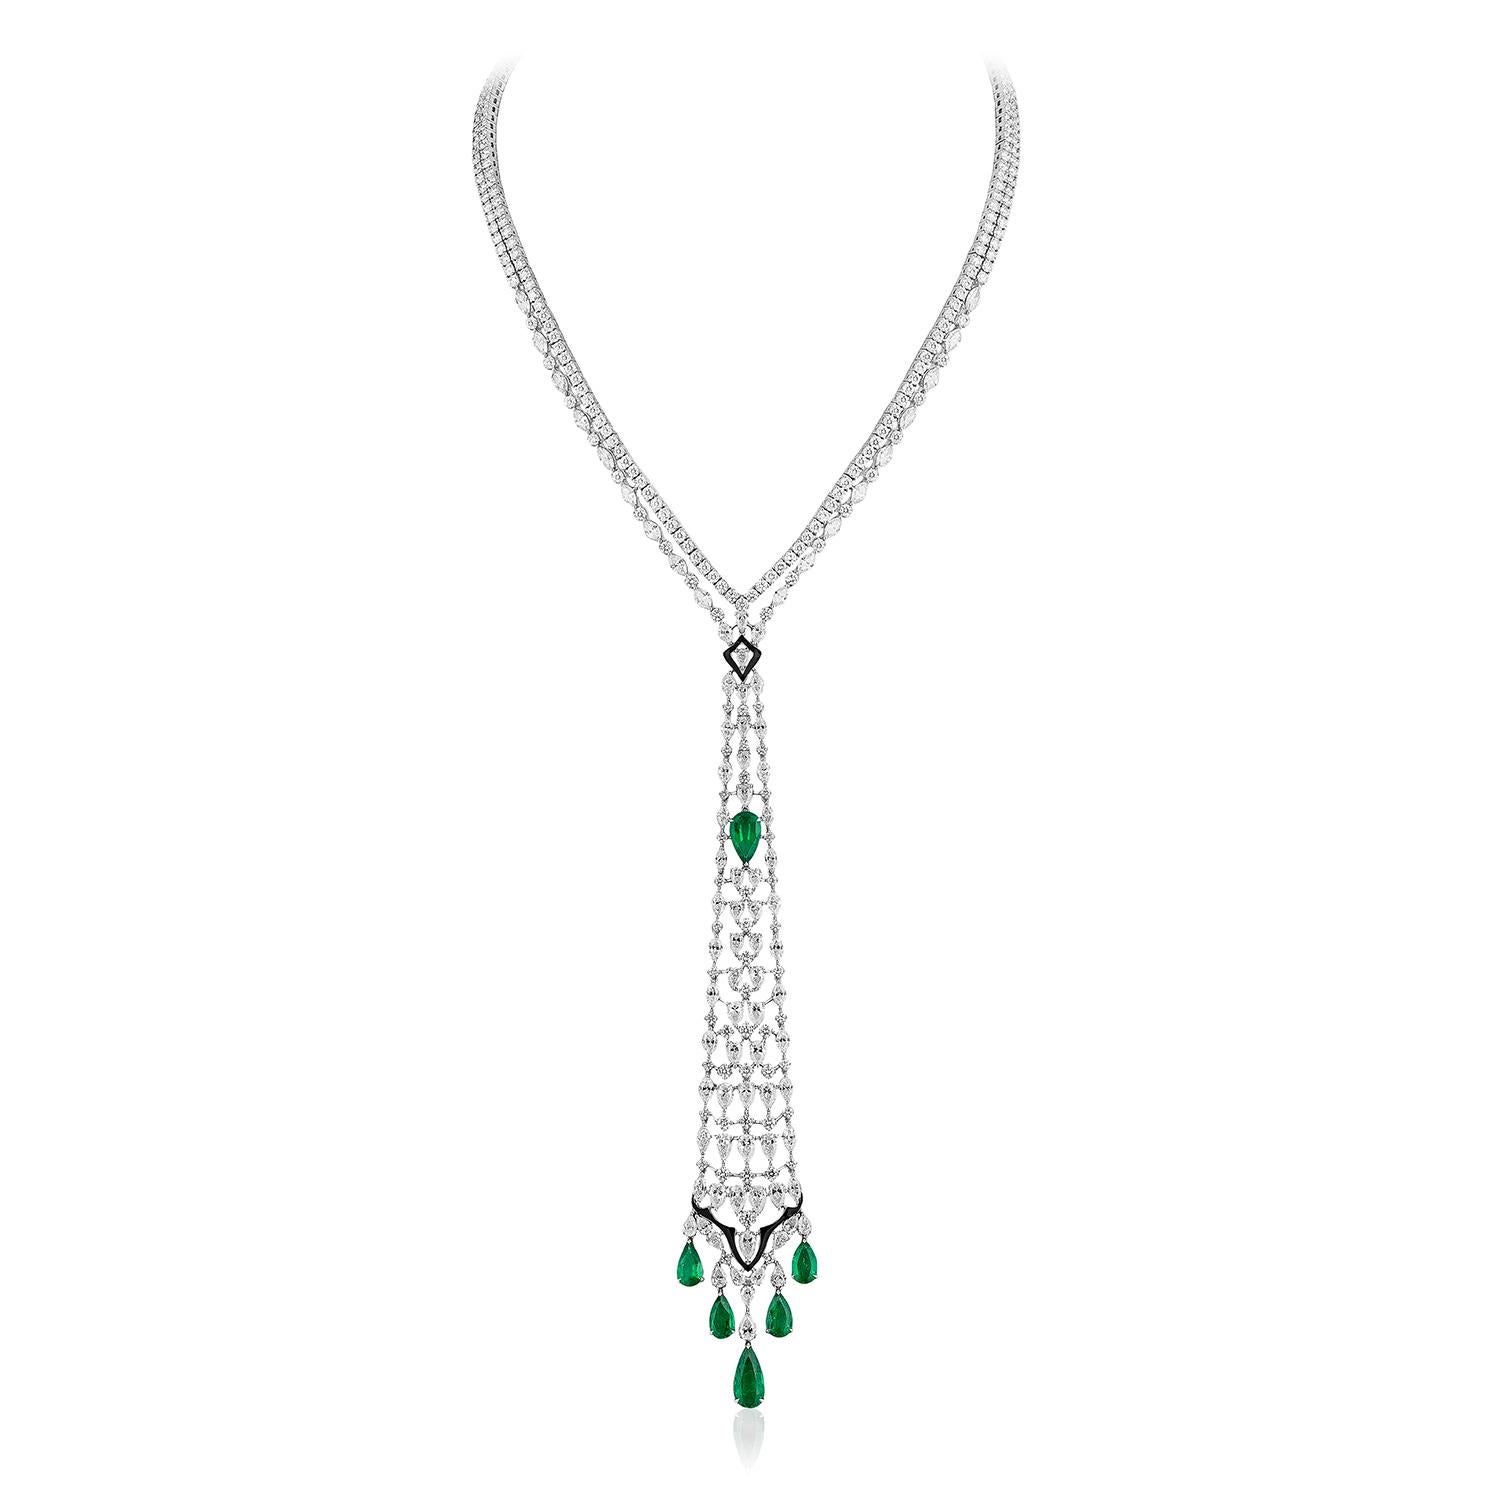 Andreoli Emerald Diamond Onyx 18 Karat White Gold Necklace

This necklace features:
- 11.40 Carat Round Diamond
- 13.62 Carat Pear Diamond
- 6.72 Carat Emerald
- Onyx
- 58.28 Gram 18K White Gold
- Made In Italy